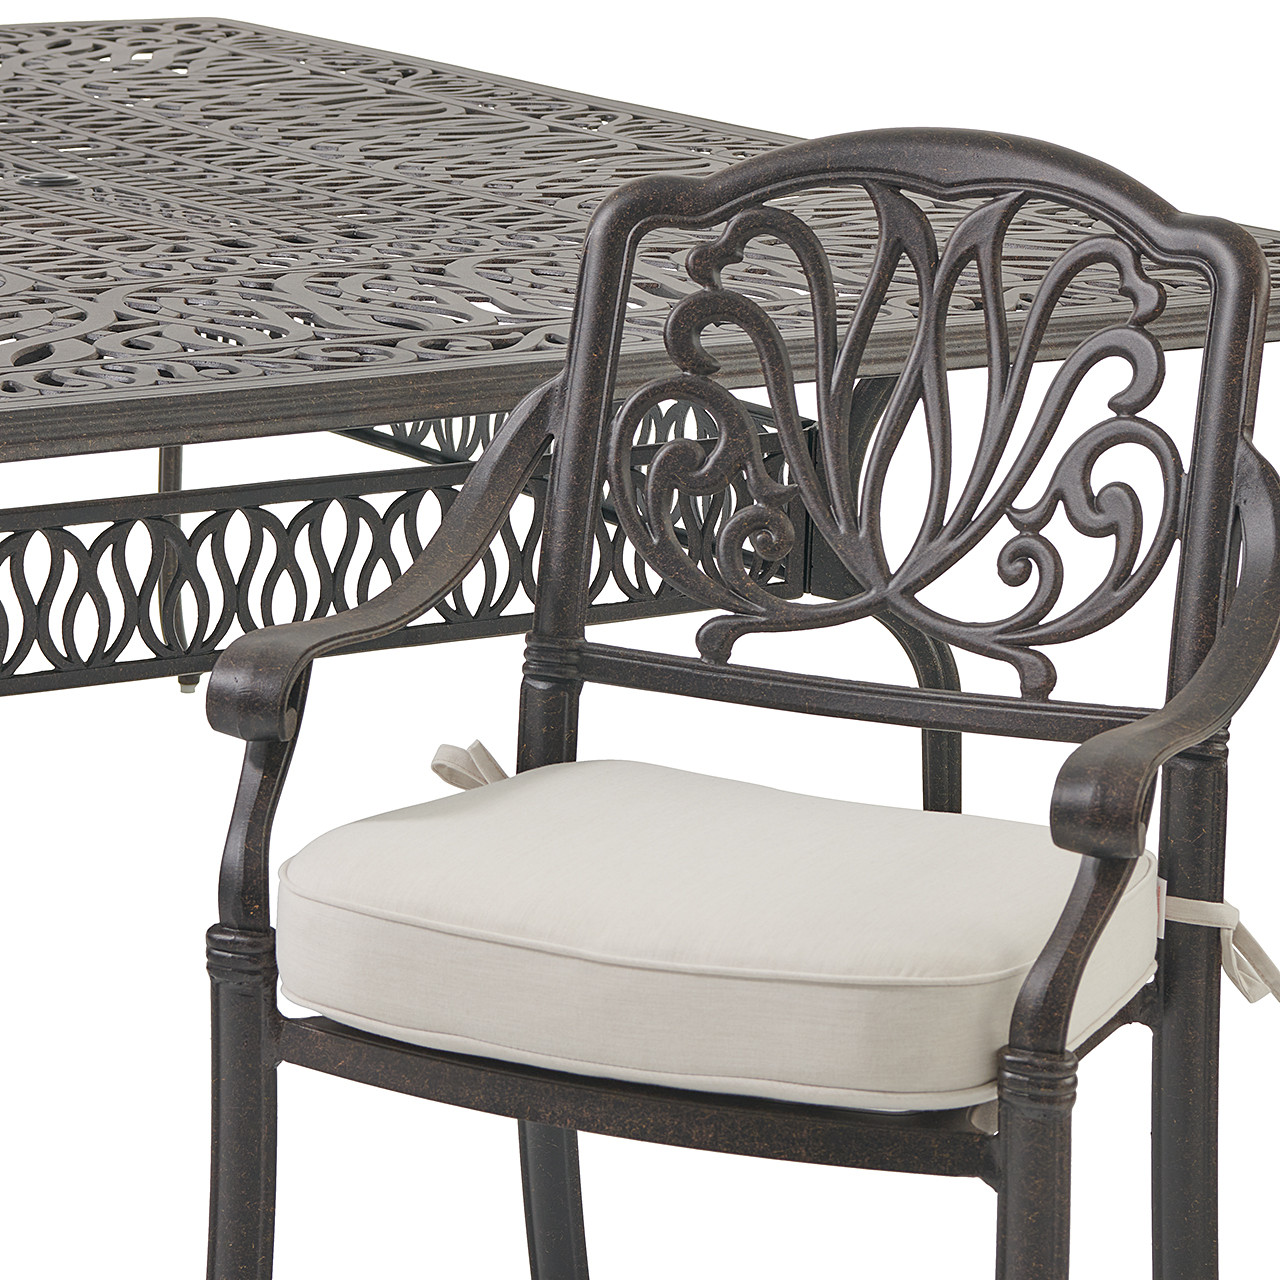 Cadiz Cast Aluminum with Cushions 11 Piece Dining Set + 90 x 64 in. Table